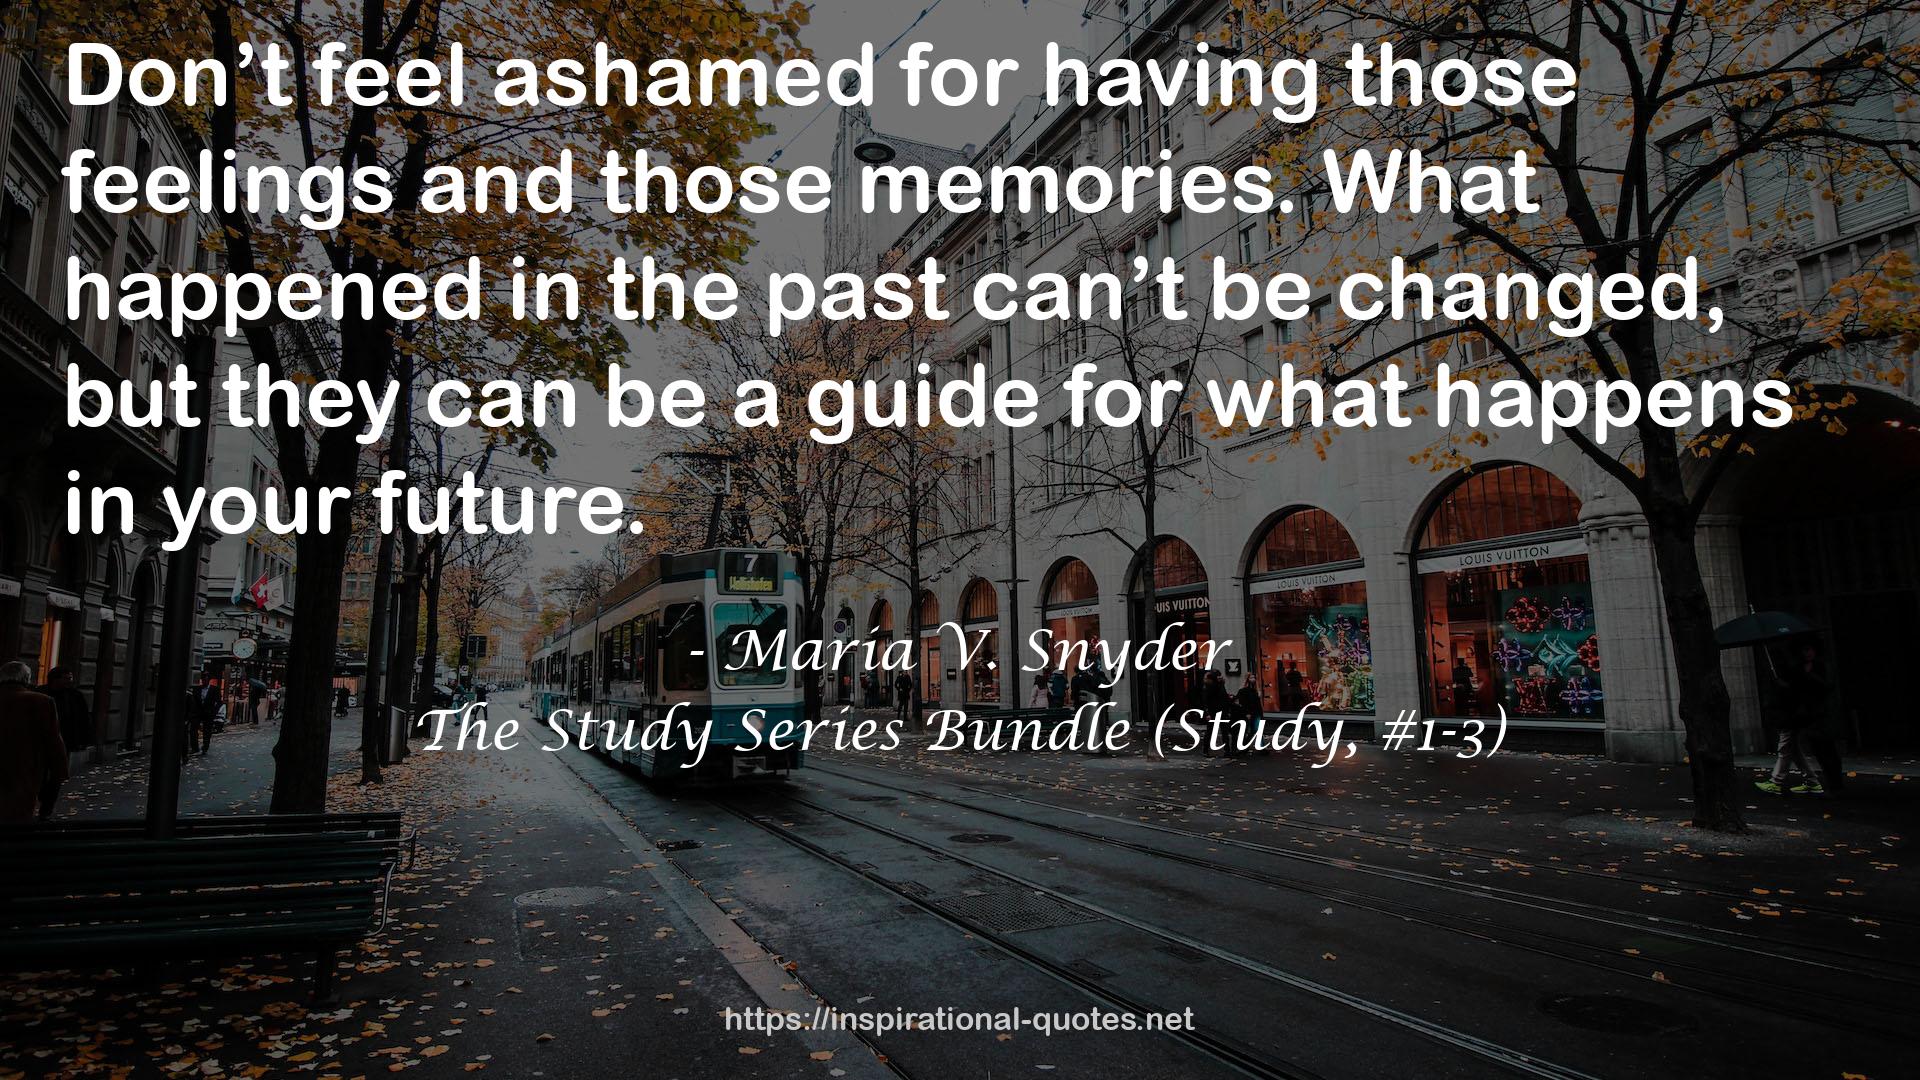 The Study Series Bundle (Study, #1-3) QUOTES